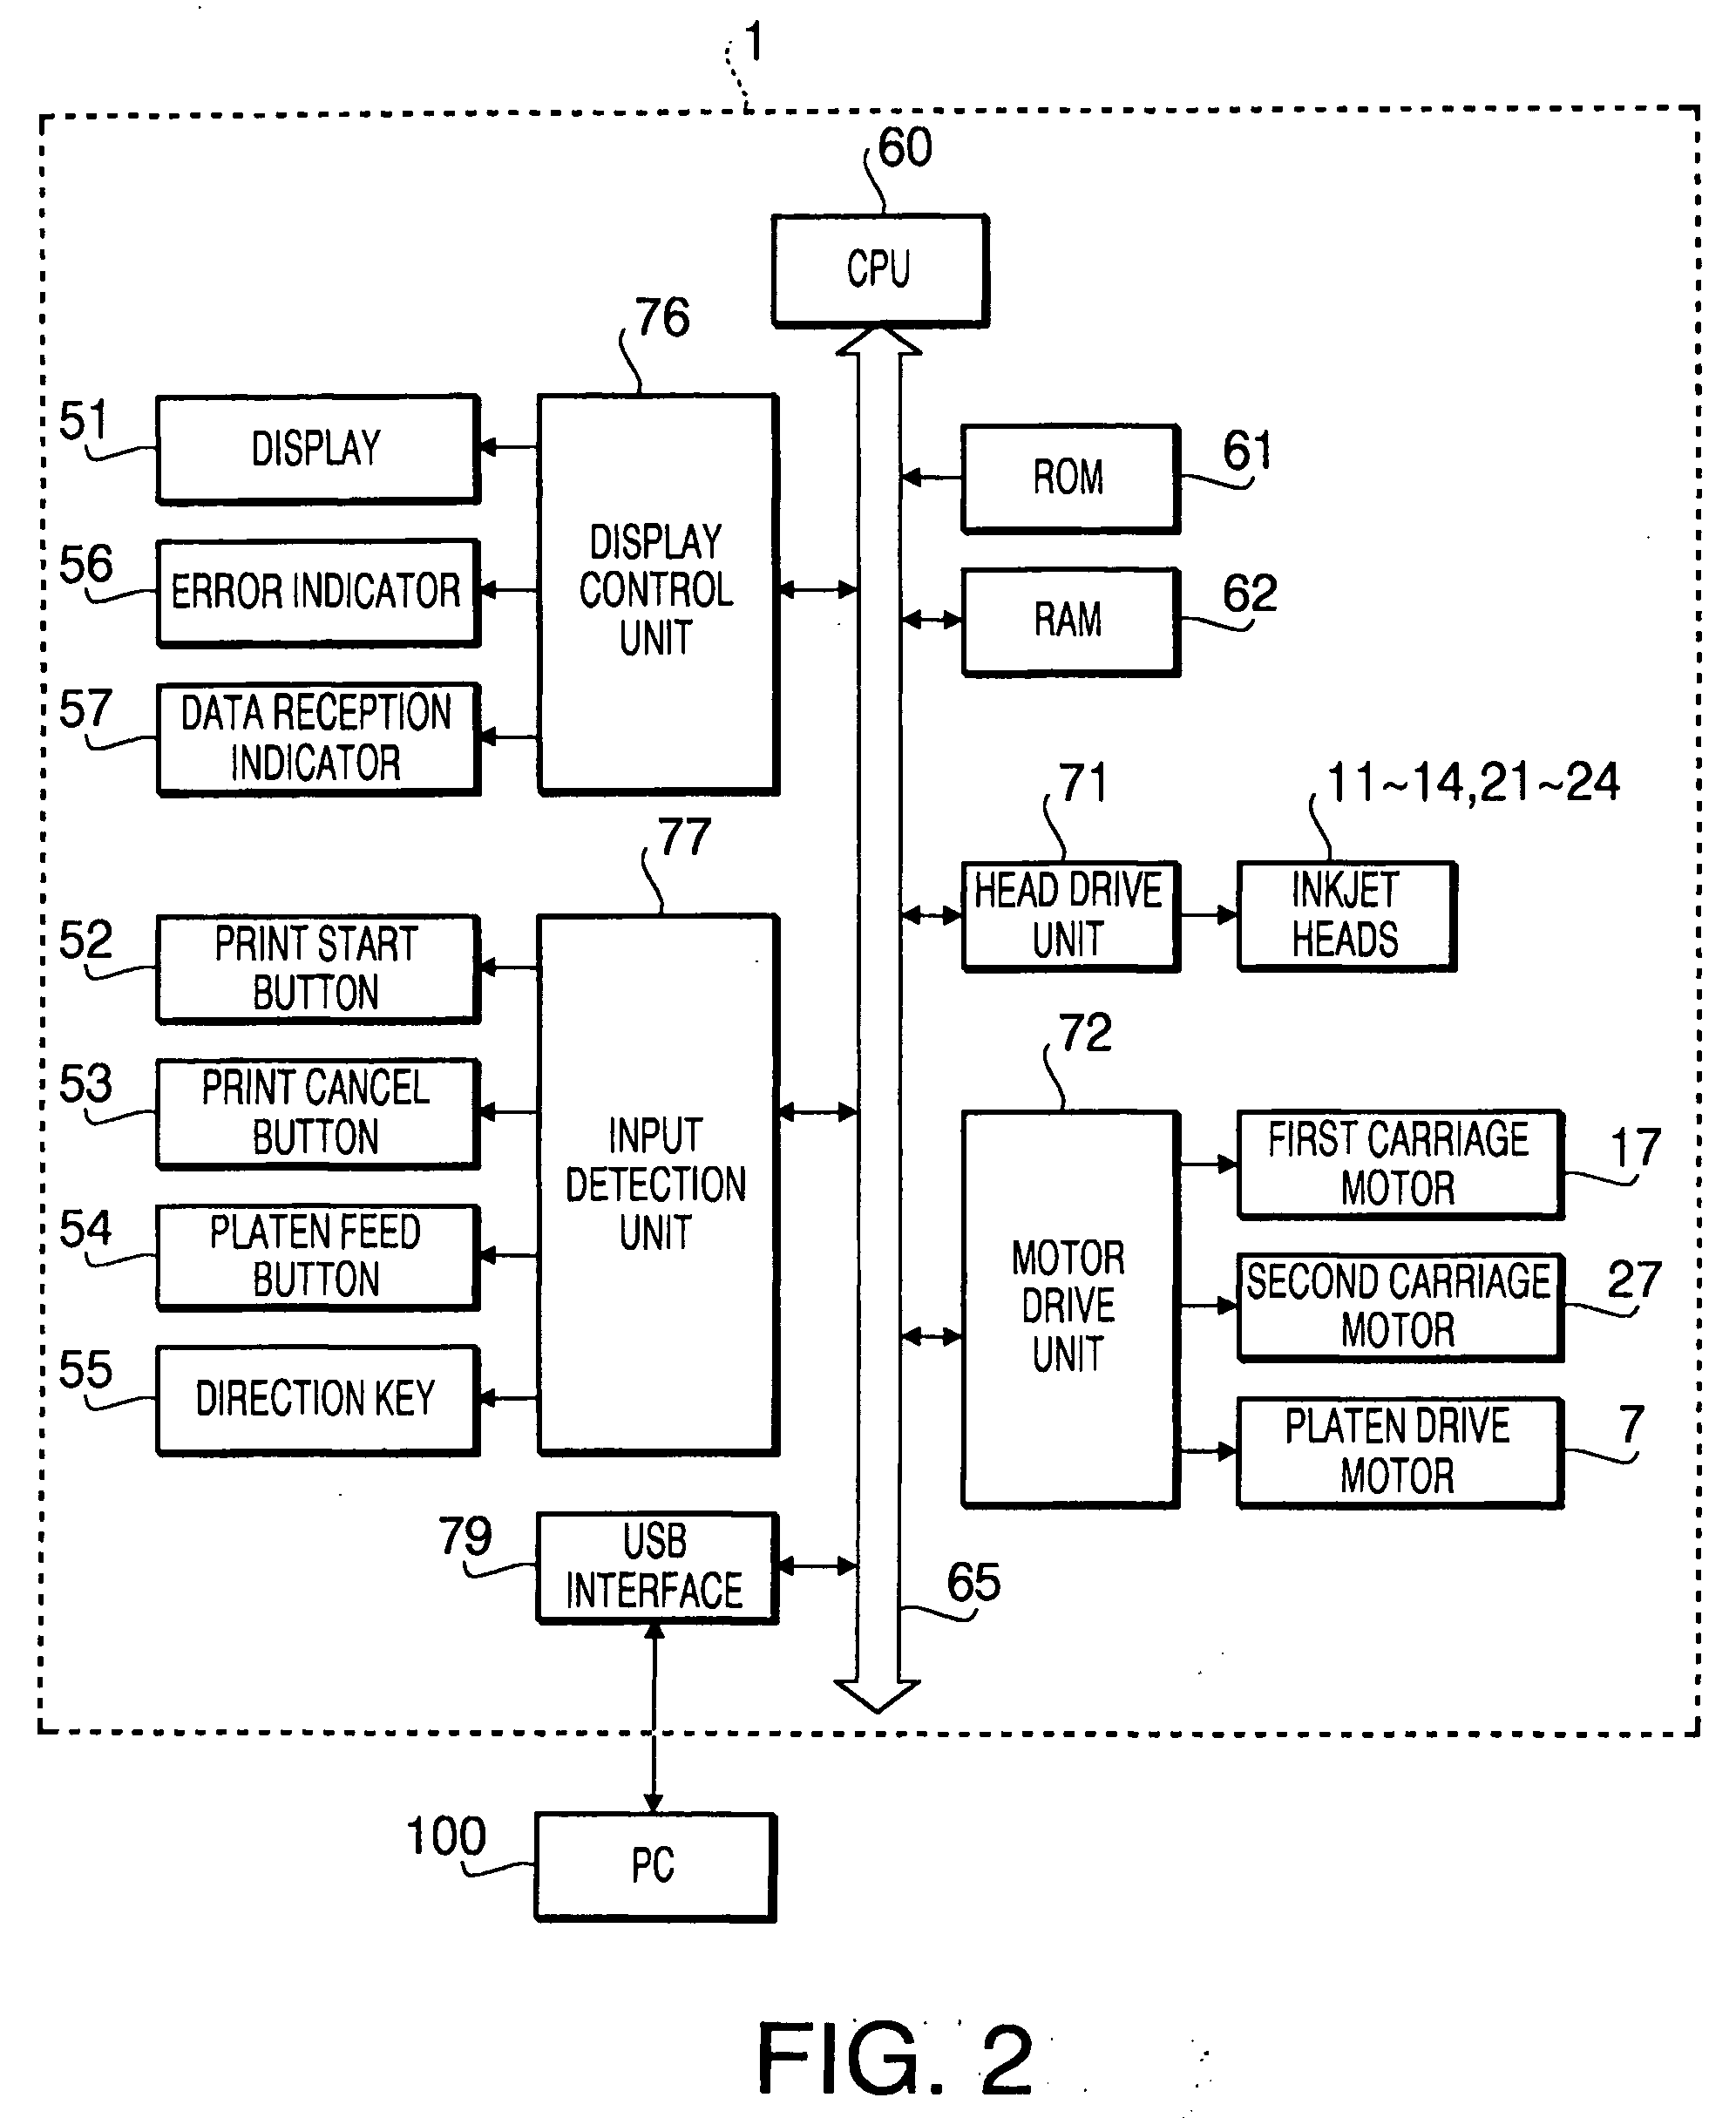 Print data generating device, method to generate print data, and computer usable medium therefor